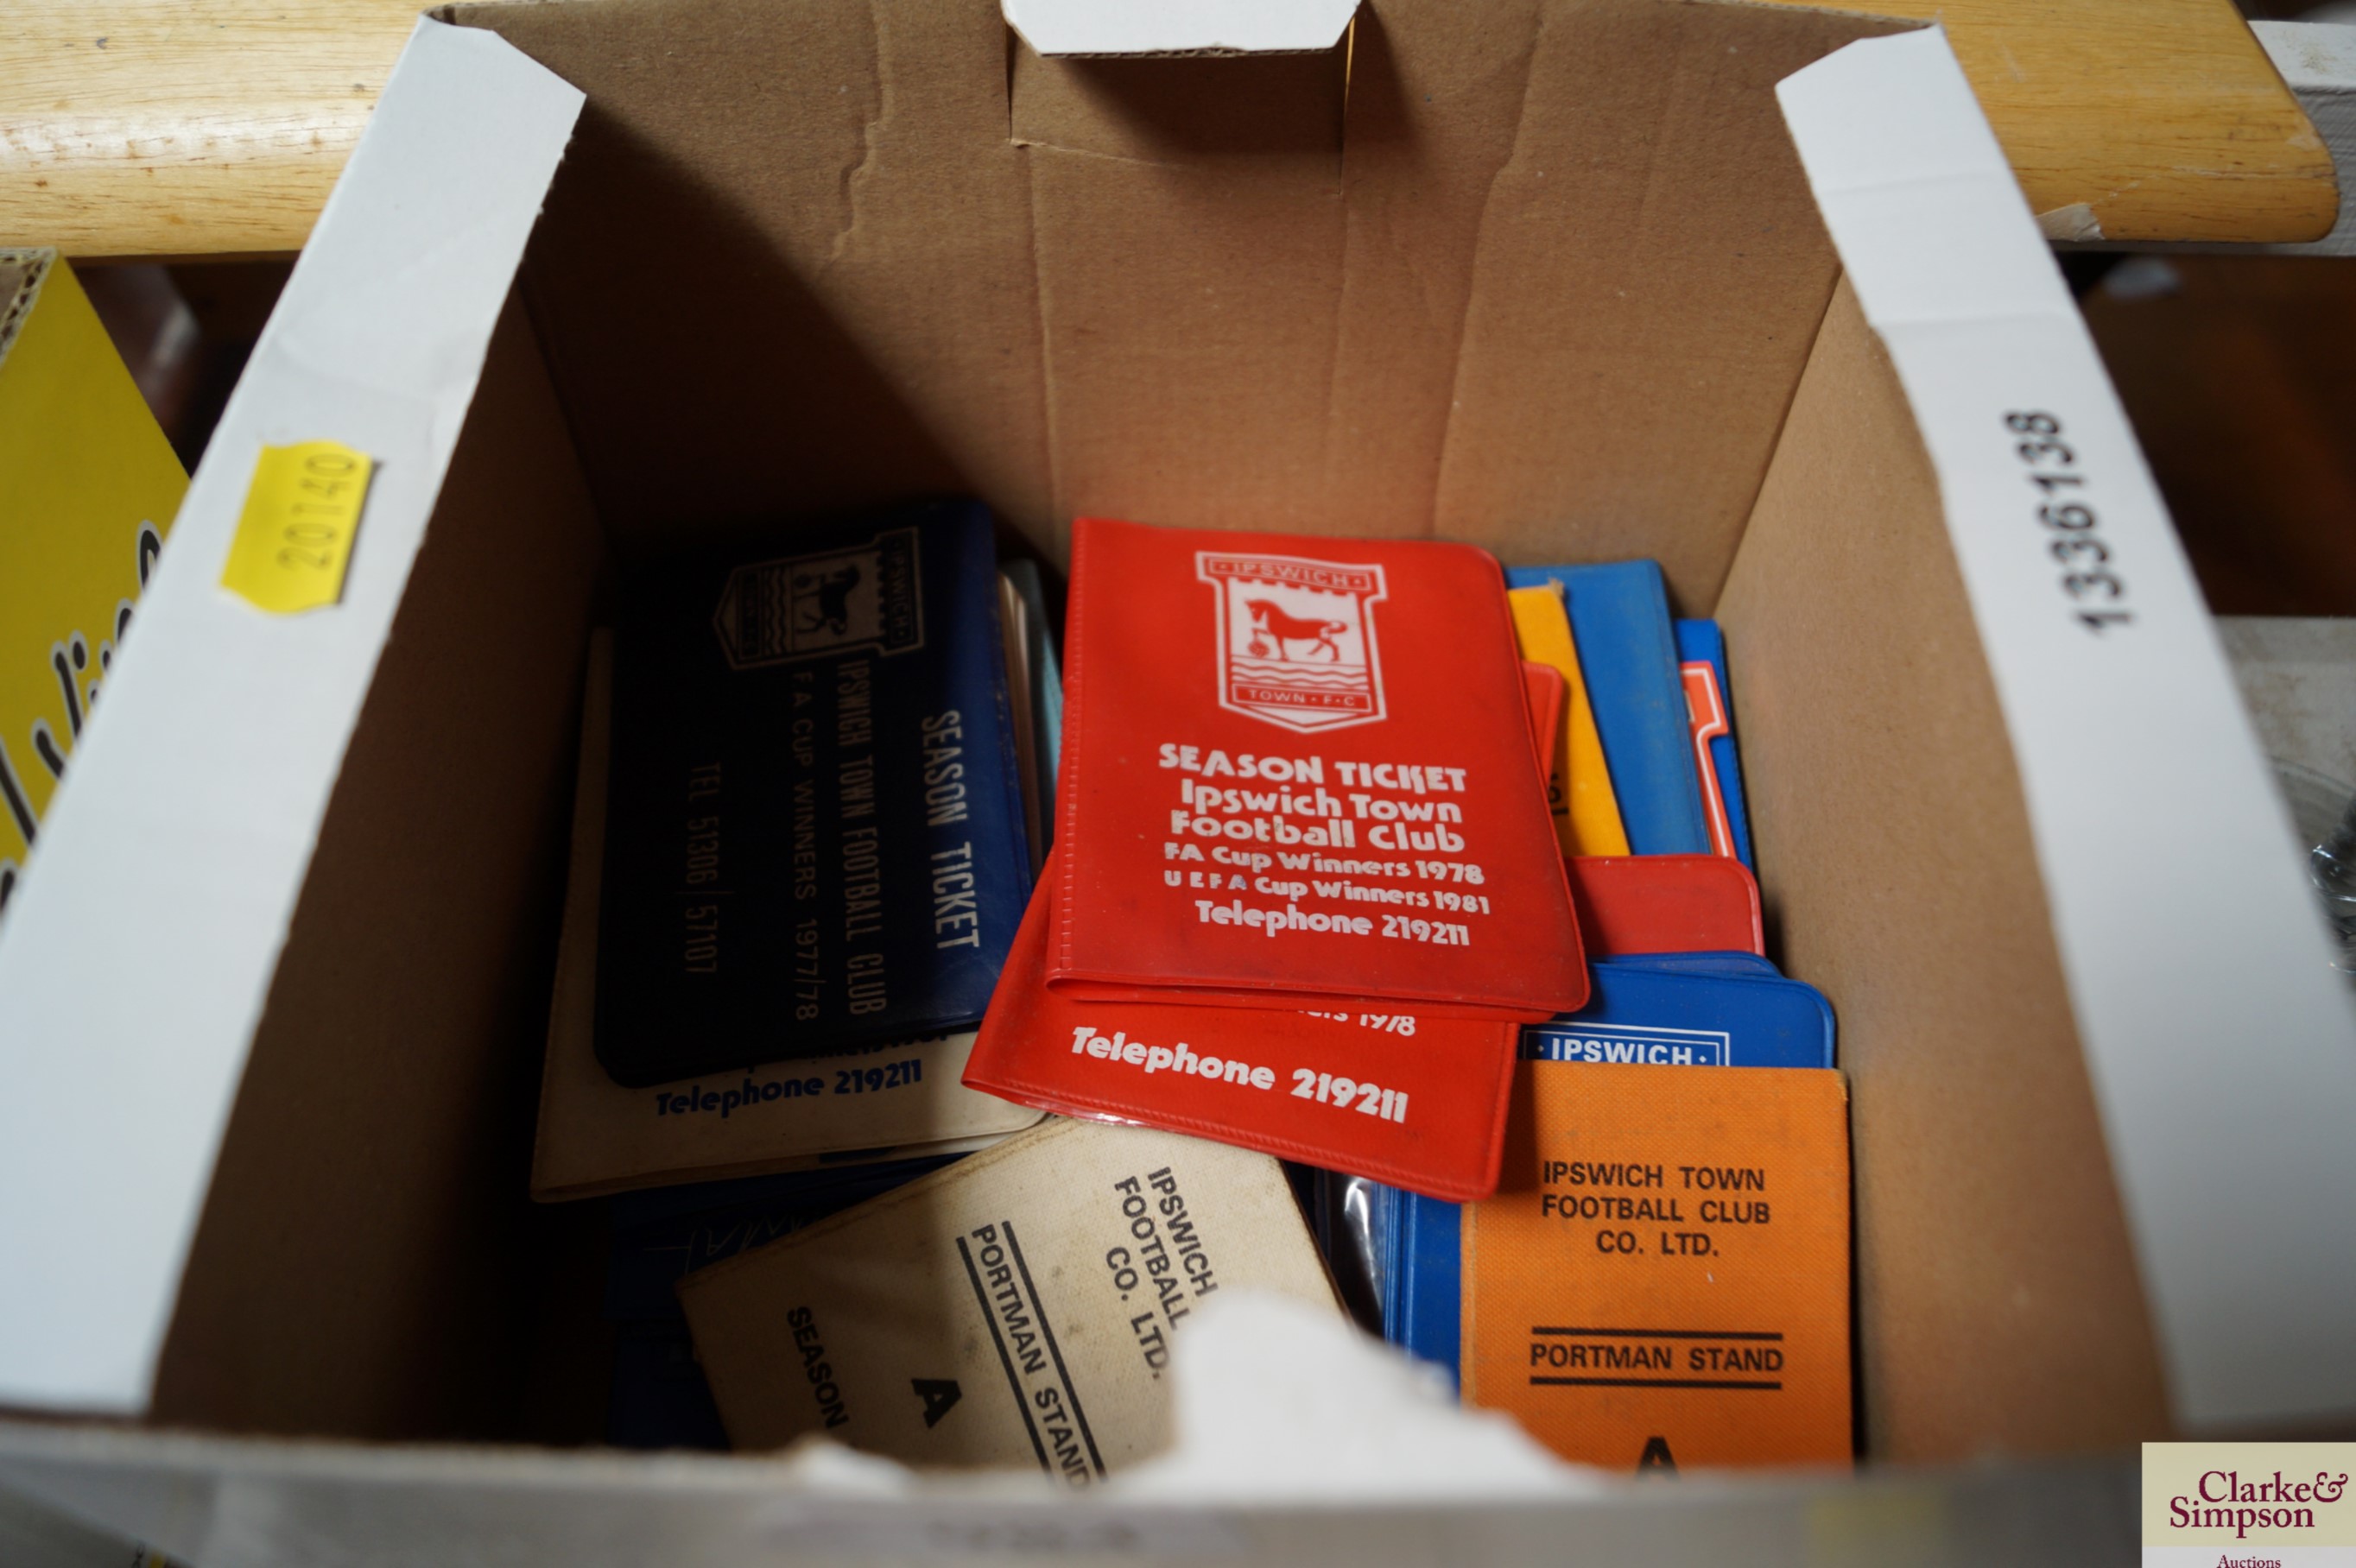 A box containing Ipswich town season tickets